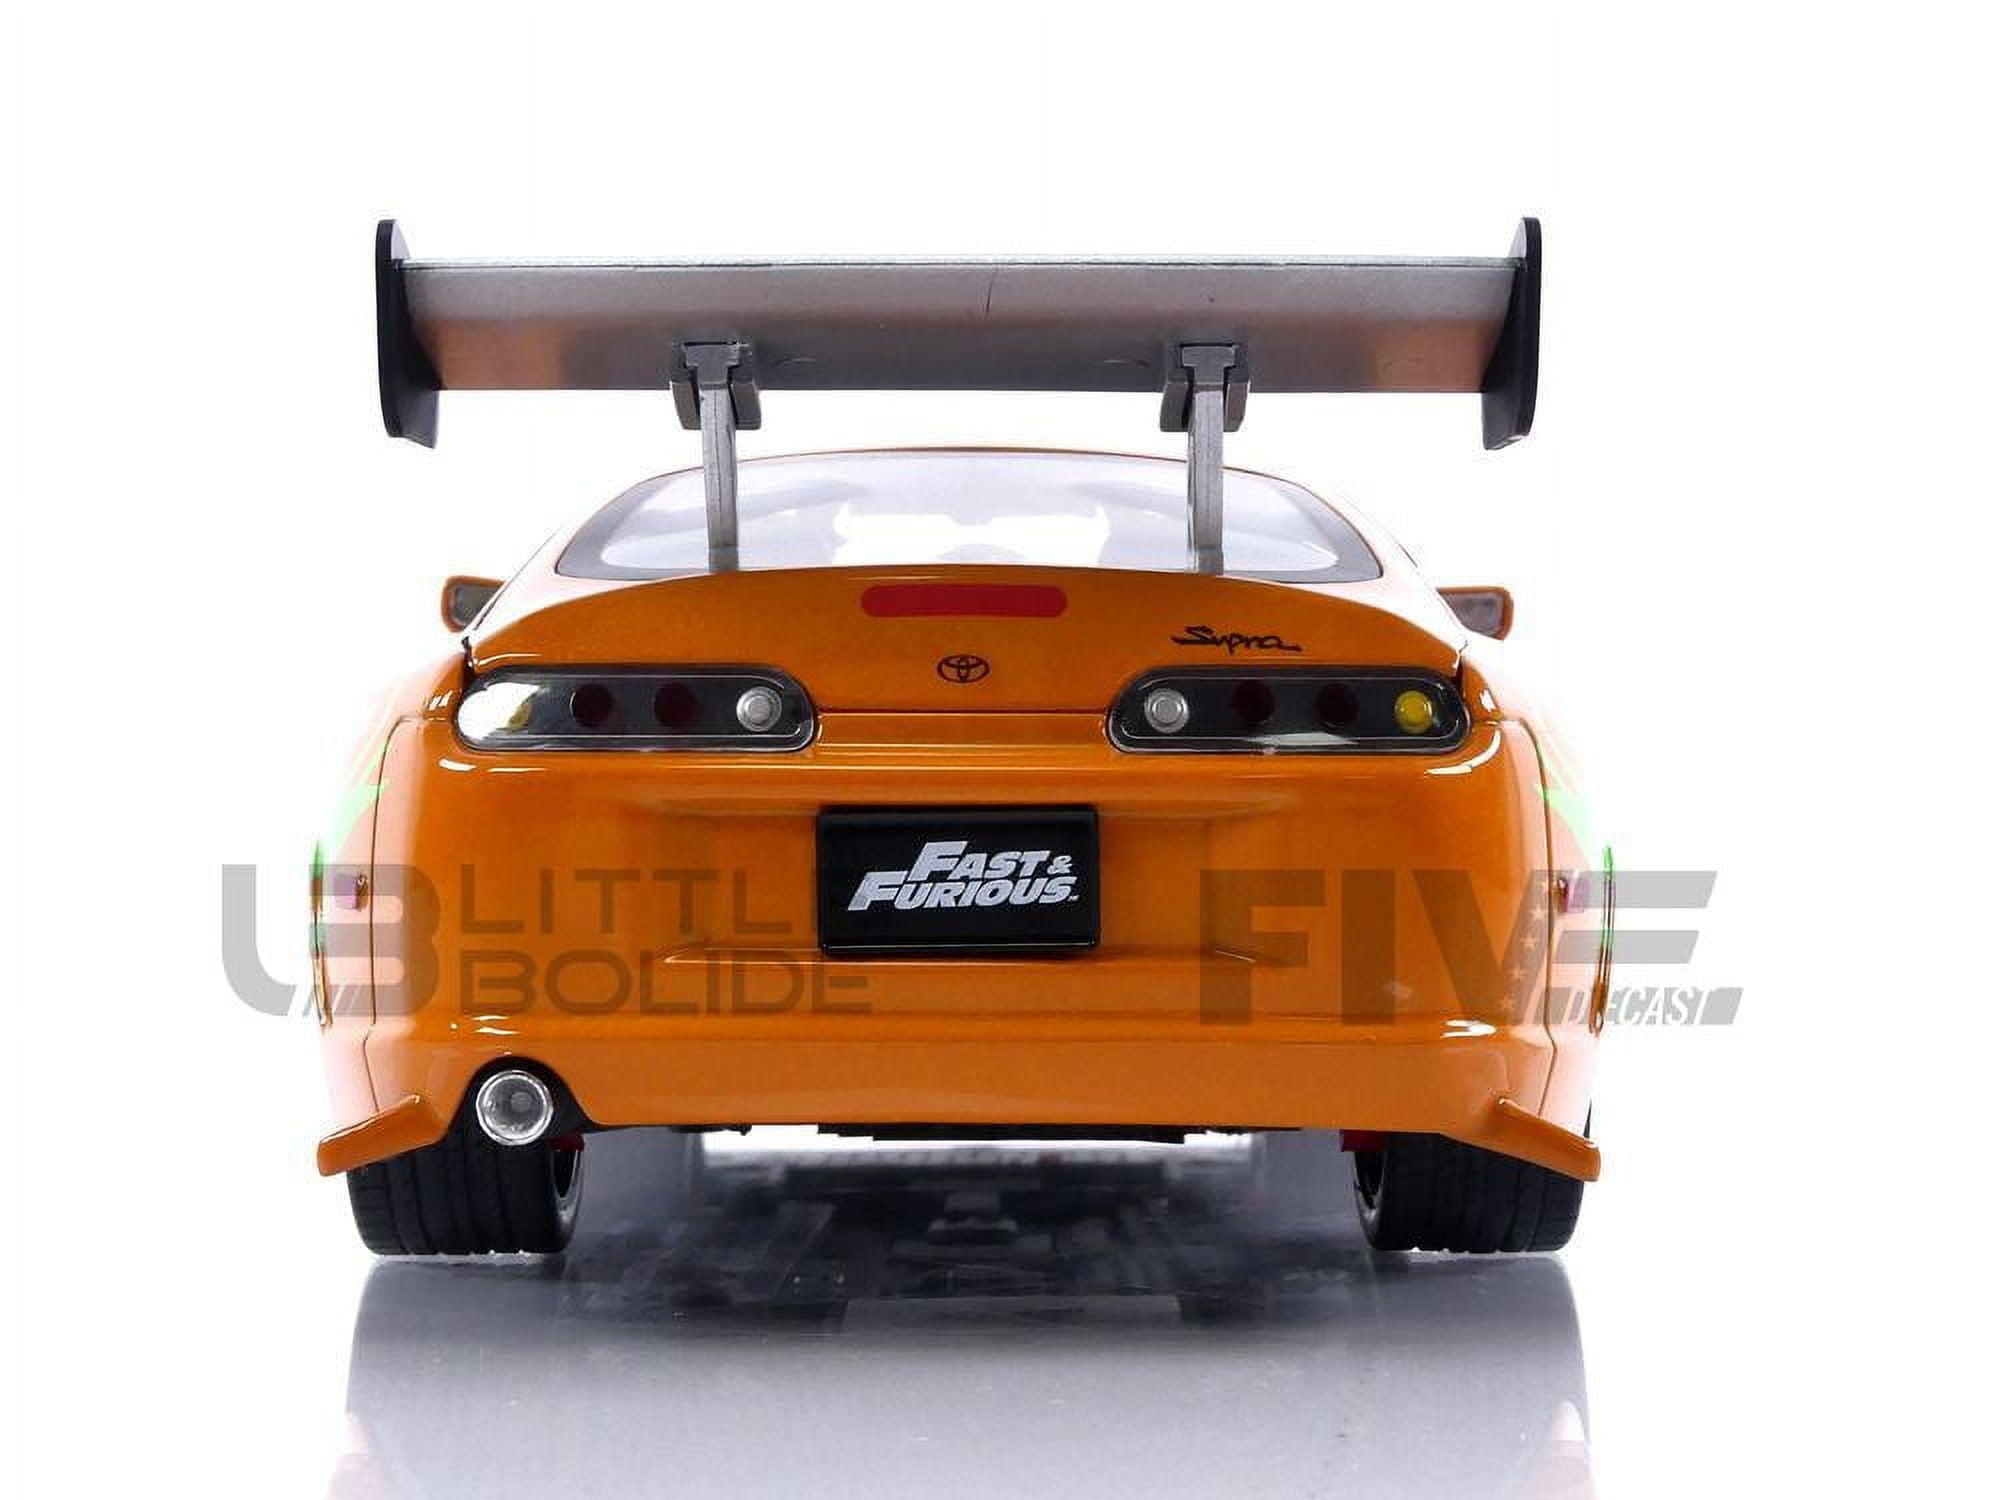 Fast & Furious 1:18 Toyota Supra Die-cast Car & 3 Brian Figure, Toys for  Kids and Adults,Orange